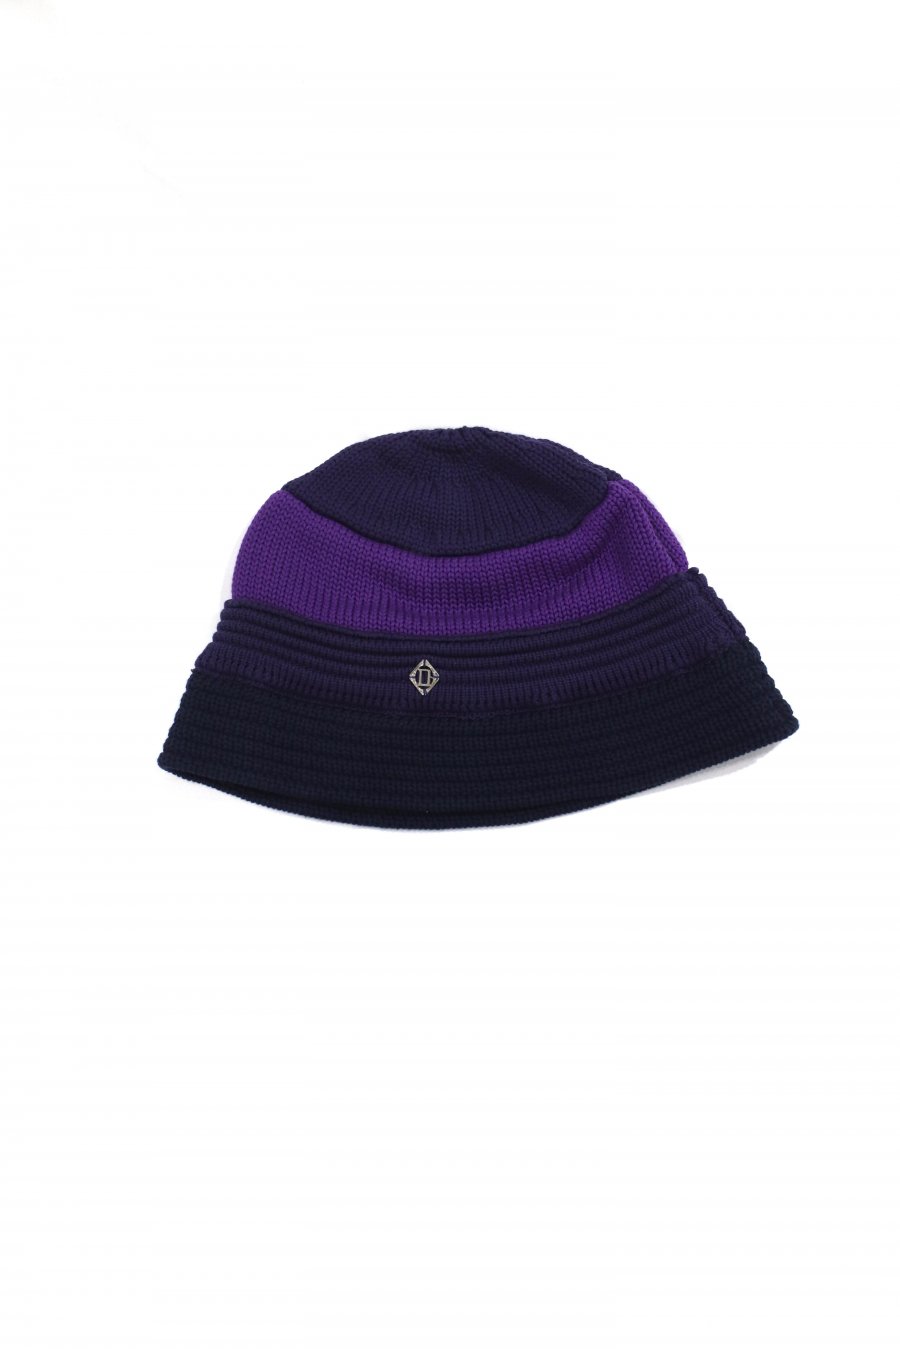 Children of the discordance  HANDKNIT BUCKET HAT(PURPLE)<img class='new_mark_img2' src='https://img.shop-pro.jp/img/new/icons15.gif' style='border:none;display:inline;margin:0px;padding:0px;width:auto;' />